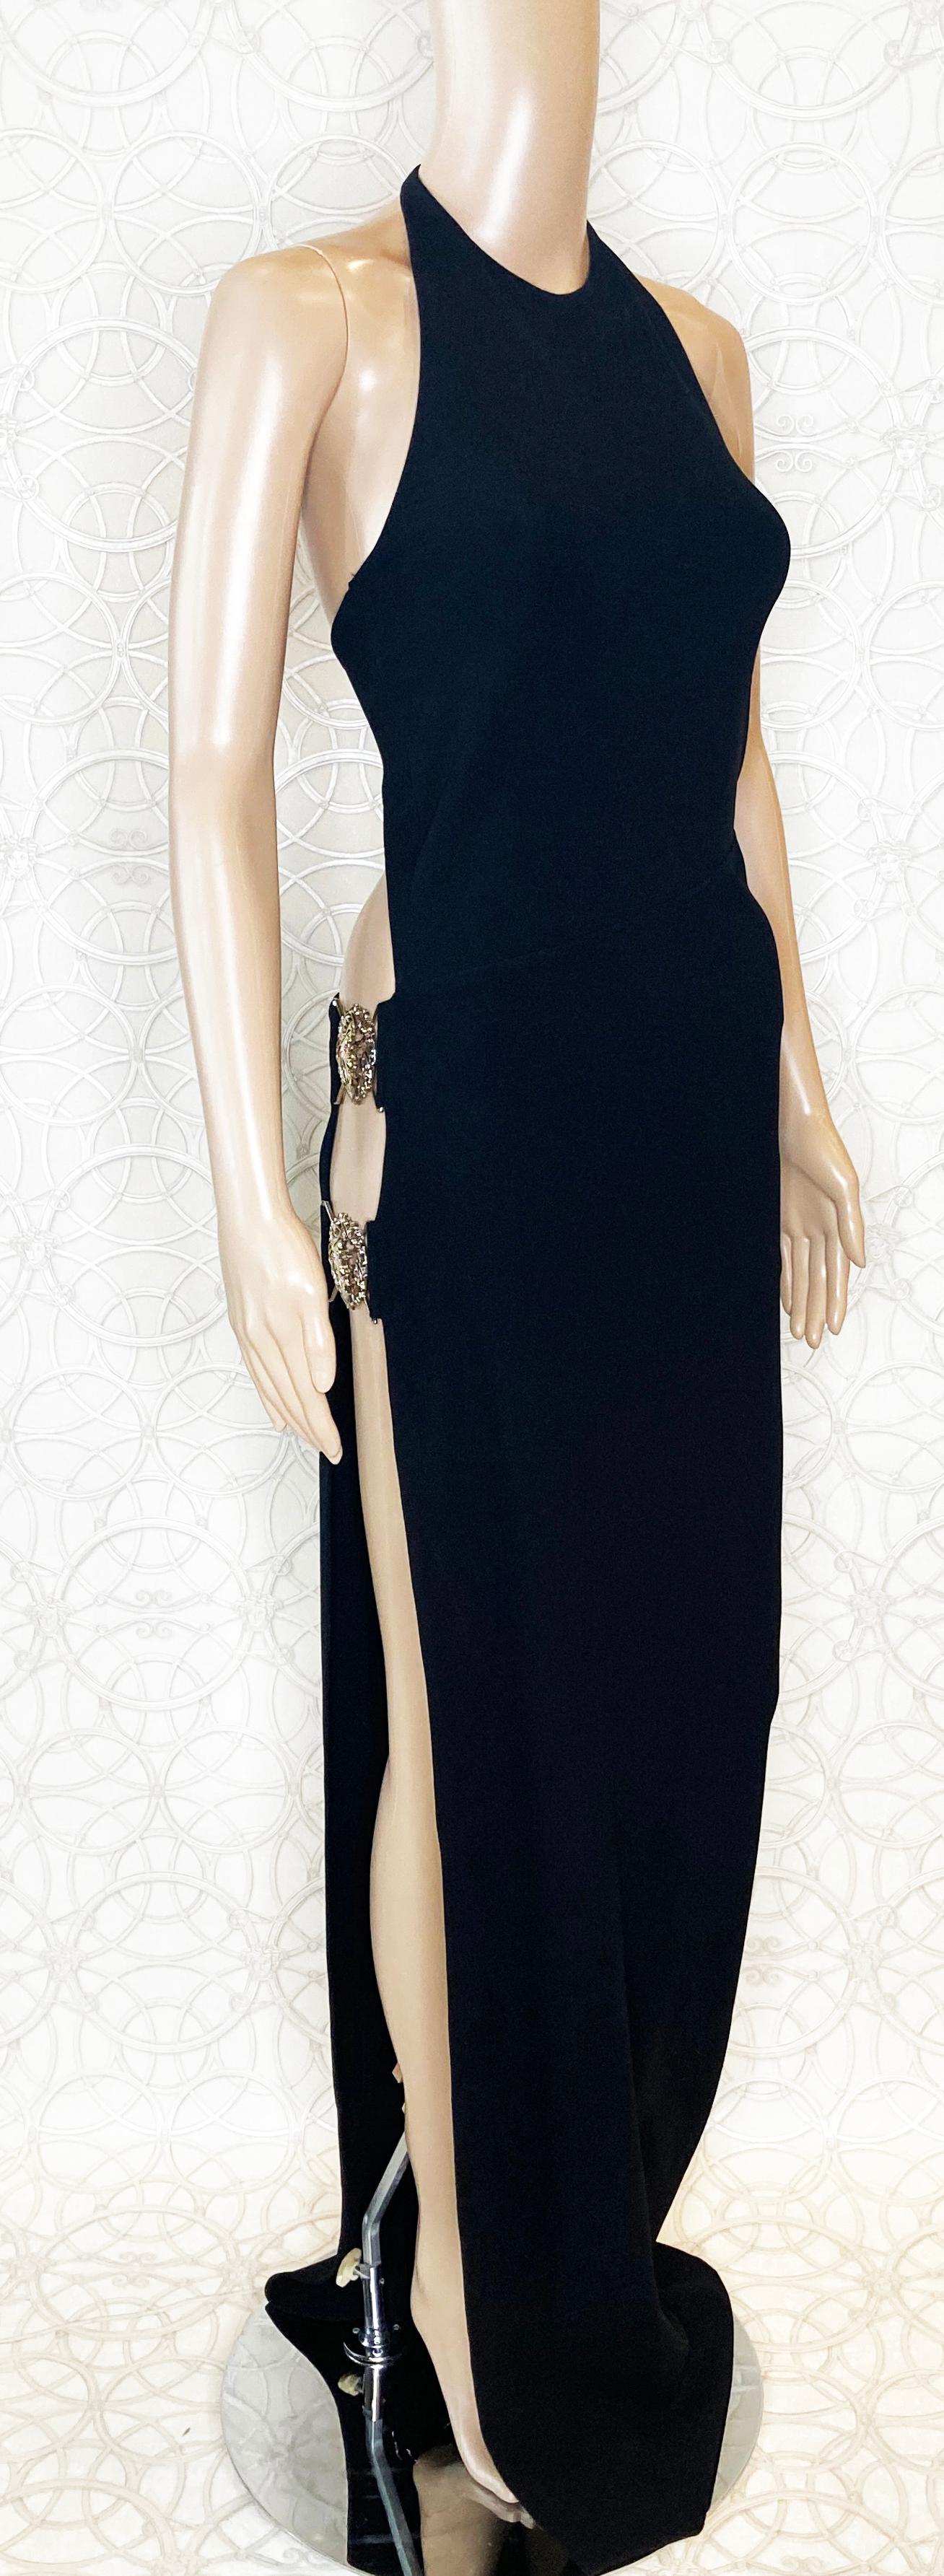 Women's S/S16 L#52 VERSUS VERSACE+Anthony Vaccarello CUT OUT ALONG SIDE BLACK GOWN 38- 2